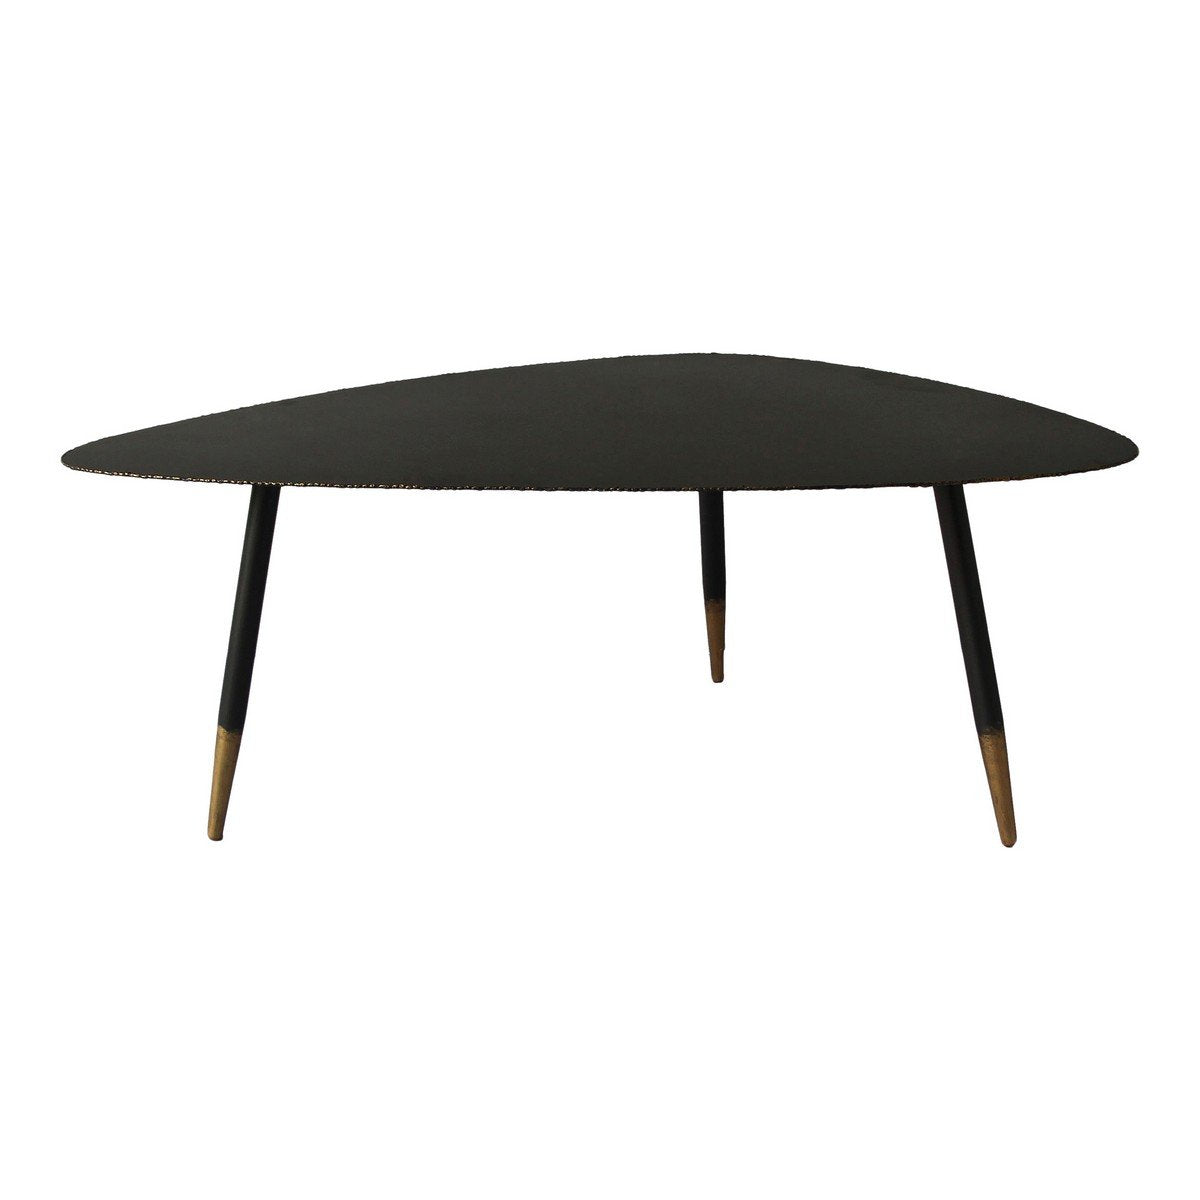 Moe's Home Collection Bruno Coffee Table - KK-1004-02 - Moe's Home Collection - Coffee Tables - Minimal And Modern - 1